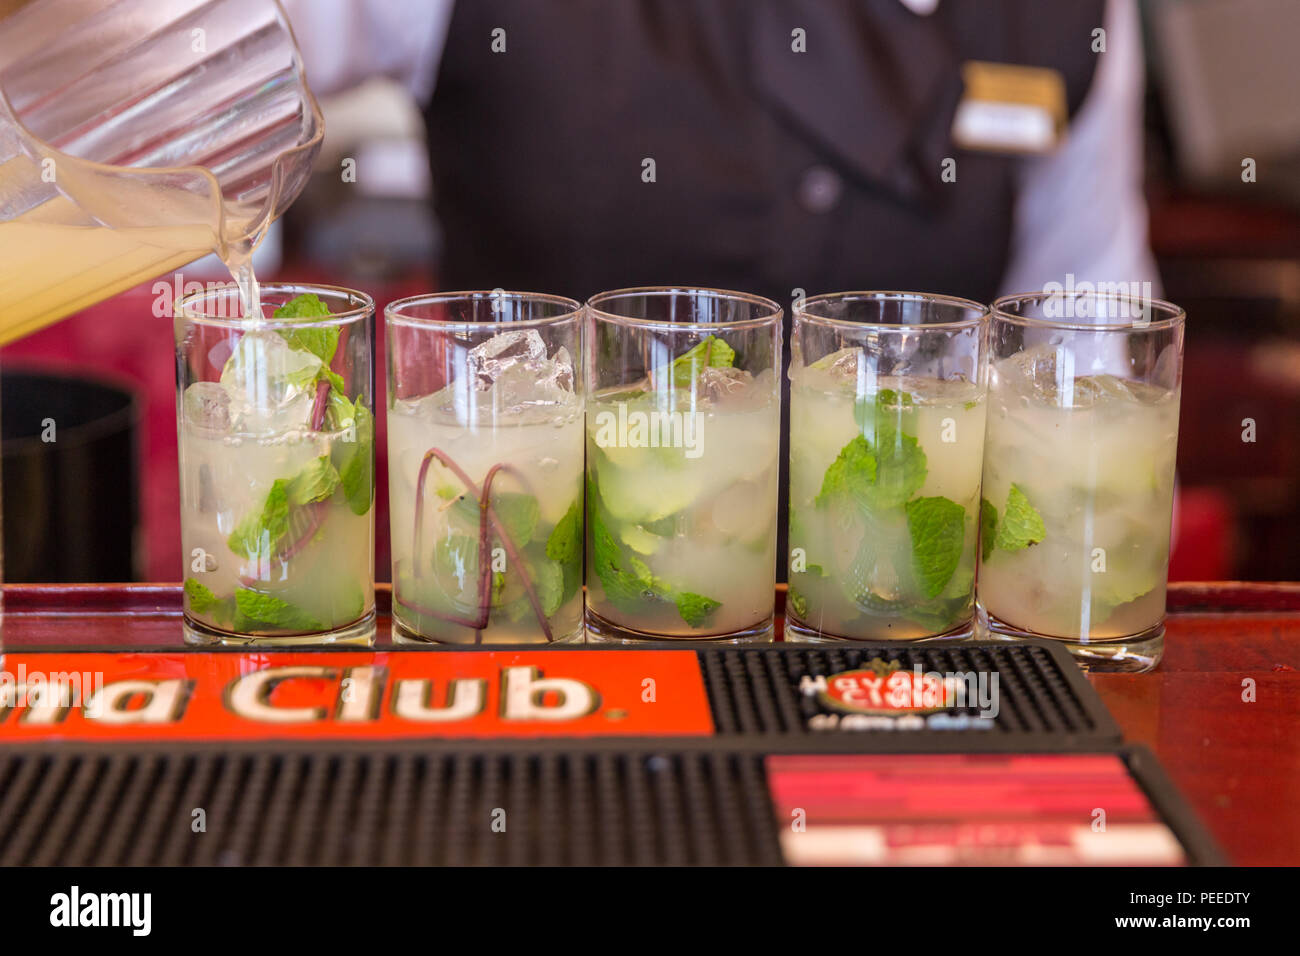 Mojitos being poured into glasses with rum in Havana, Cuba Stock Photo